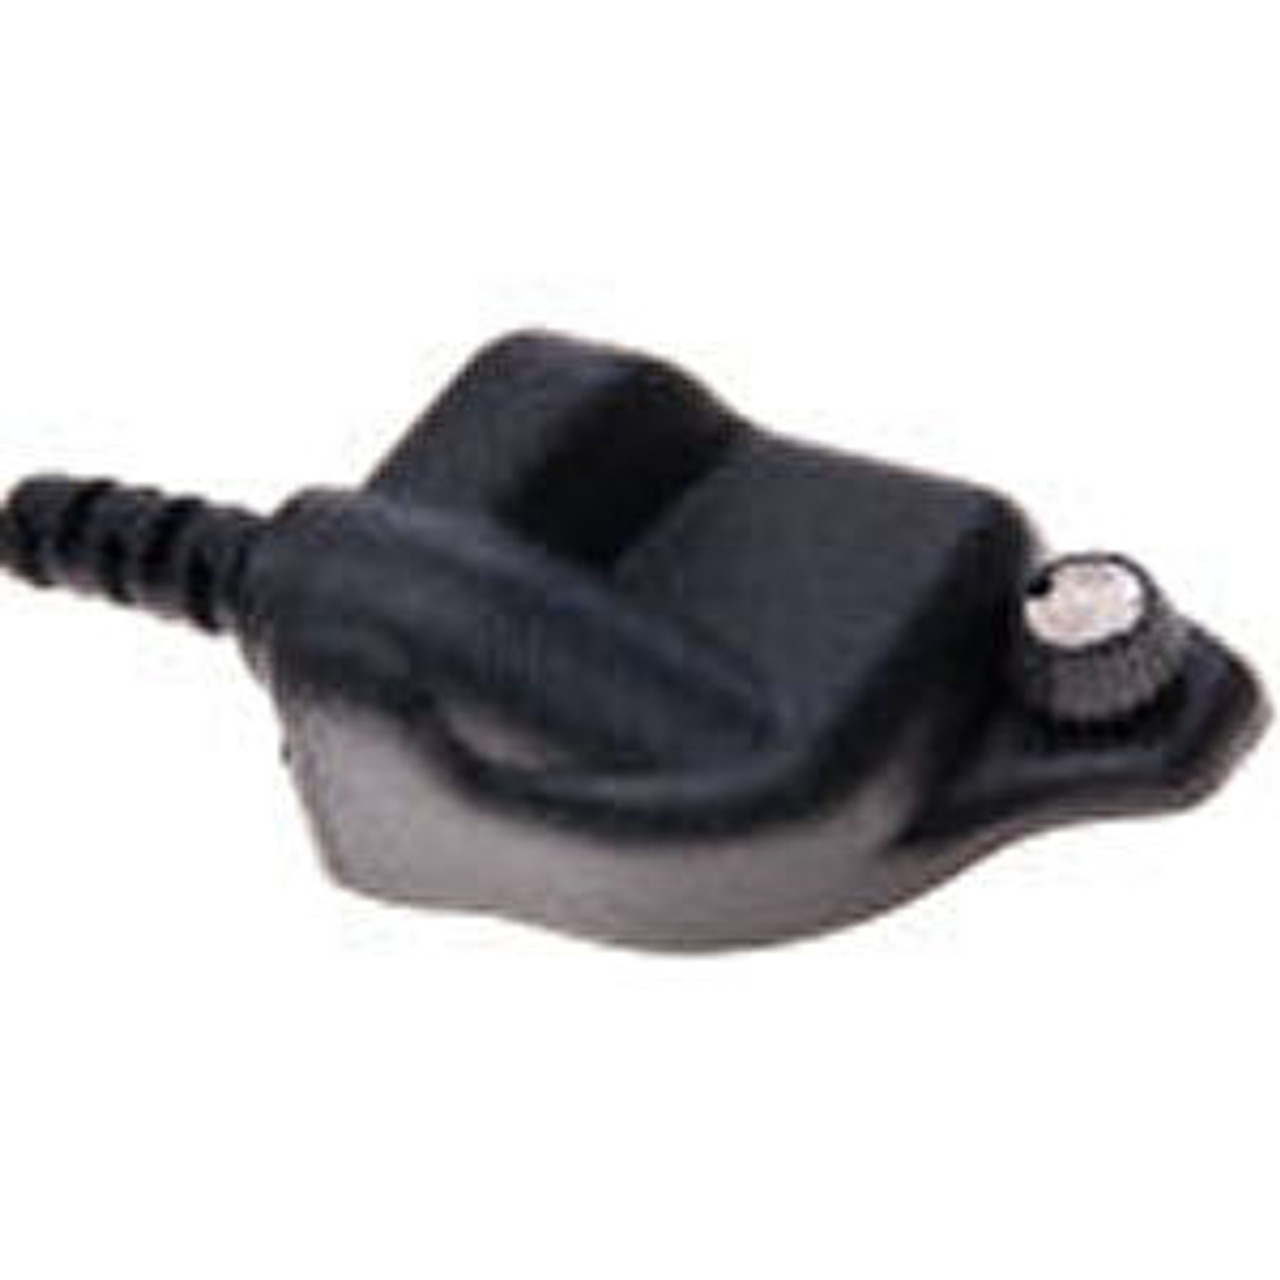 TAC 1 Systems IP67 E-Button Mic. Replaces Harris part number XR-AE6A